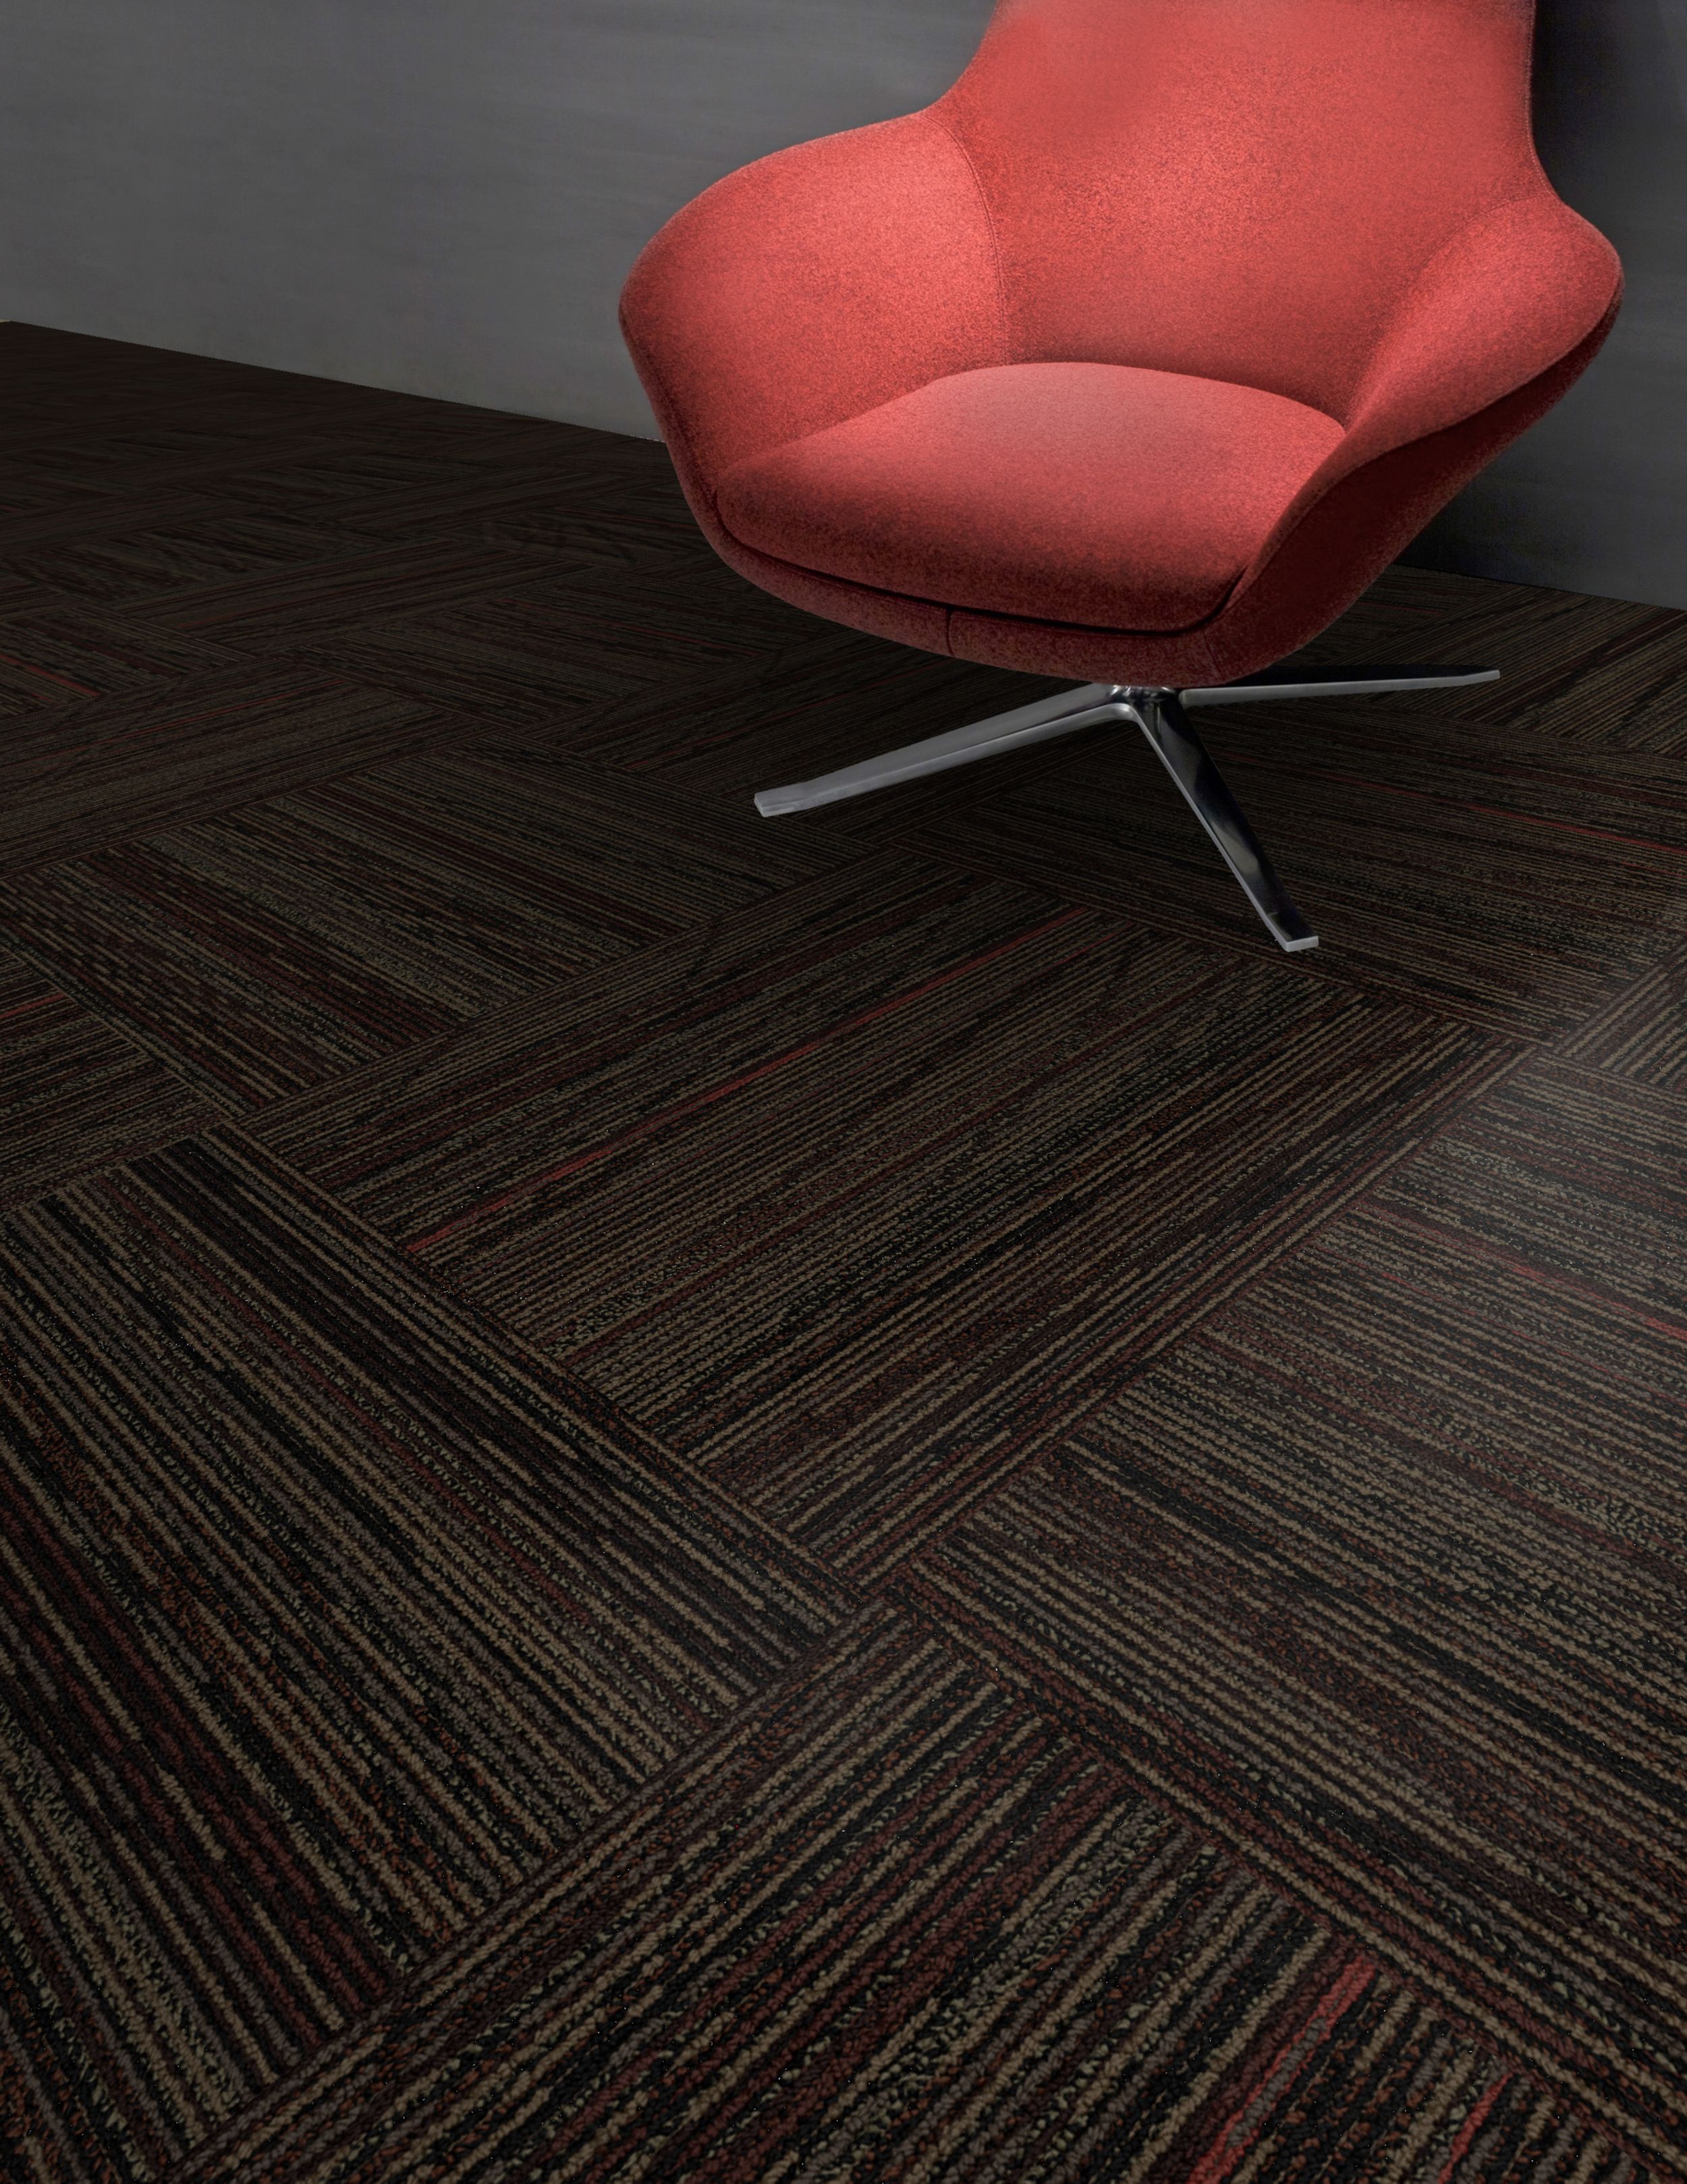 Detail of Interface Prairie Grass Loop carpet tile with red chair imagen número 3